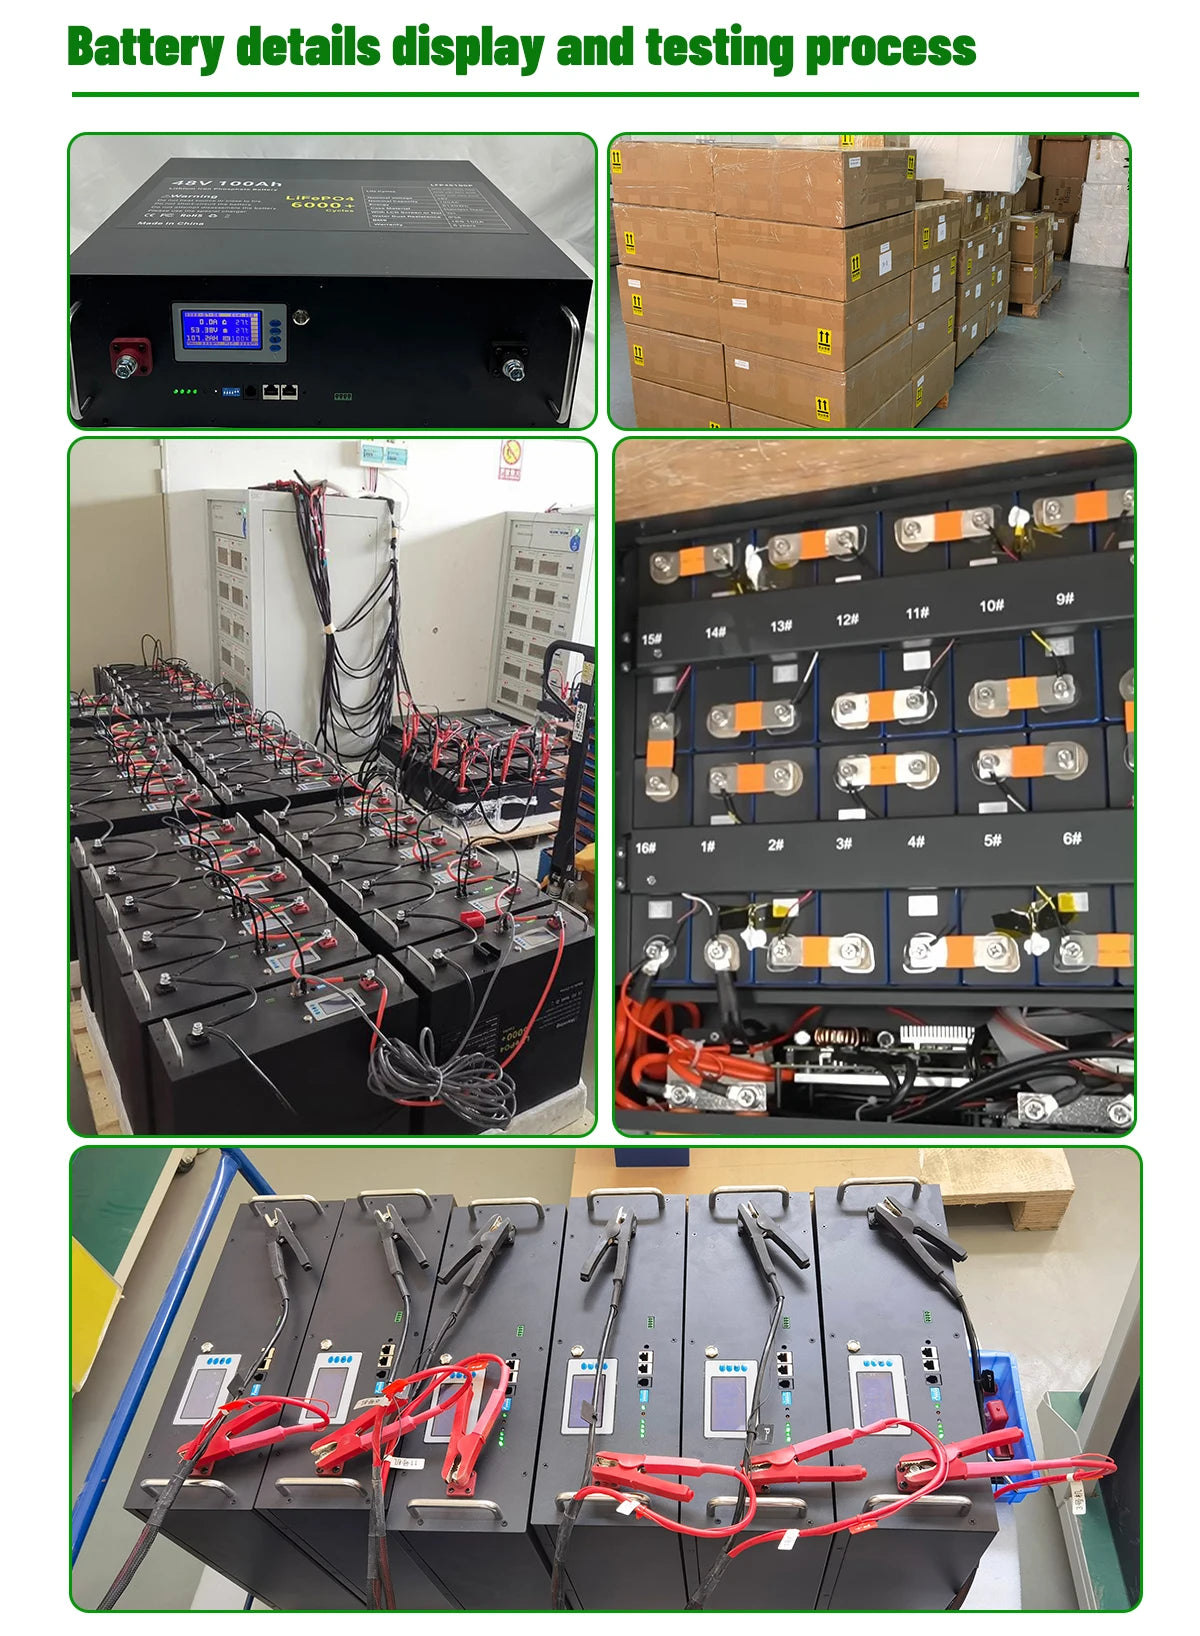 LiFePO4 48V 200AH Battery, Battery details and testing processes displayed, including voltage, current, and capacity, for monitoring purposes.